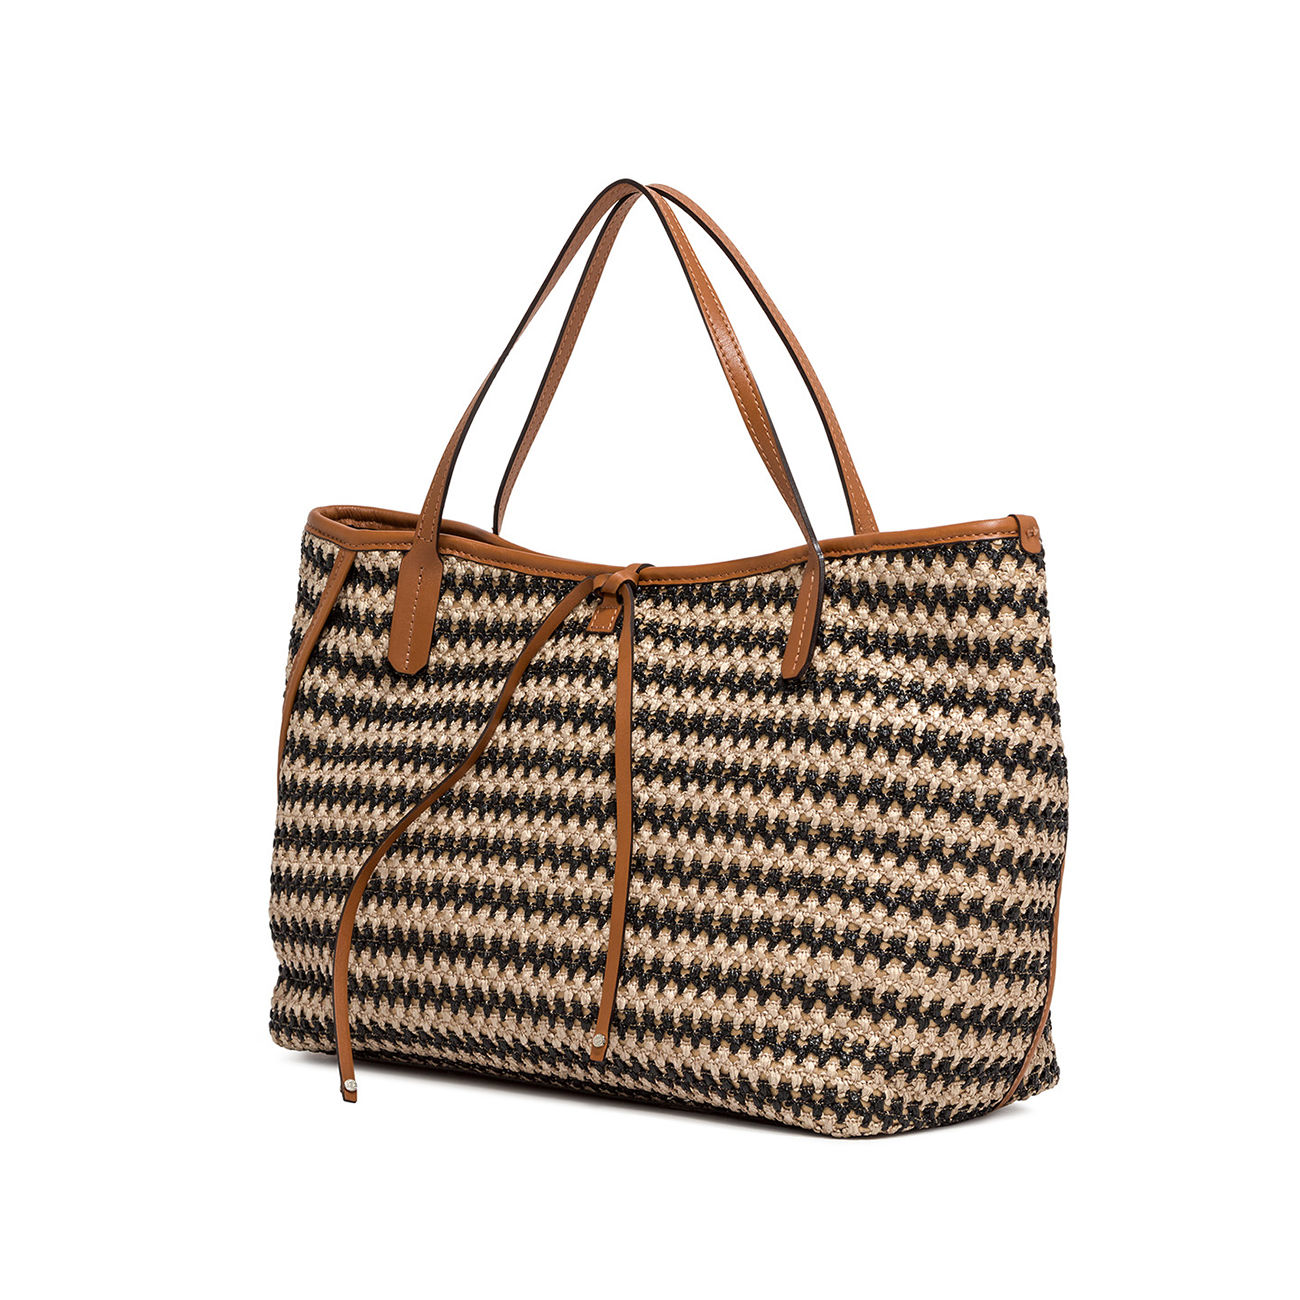 Large camel brown woven leather tote bag TRACY - Payment in 4